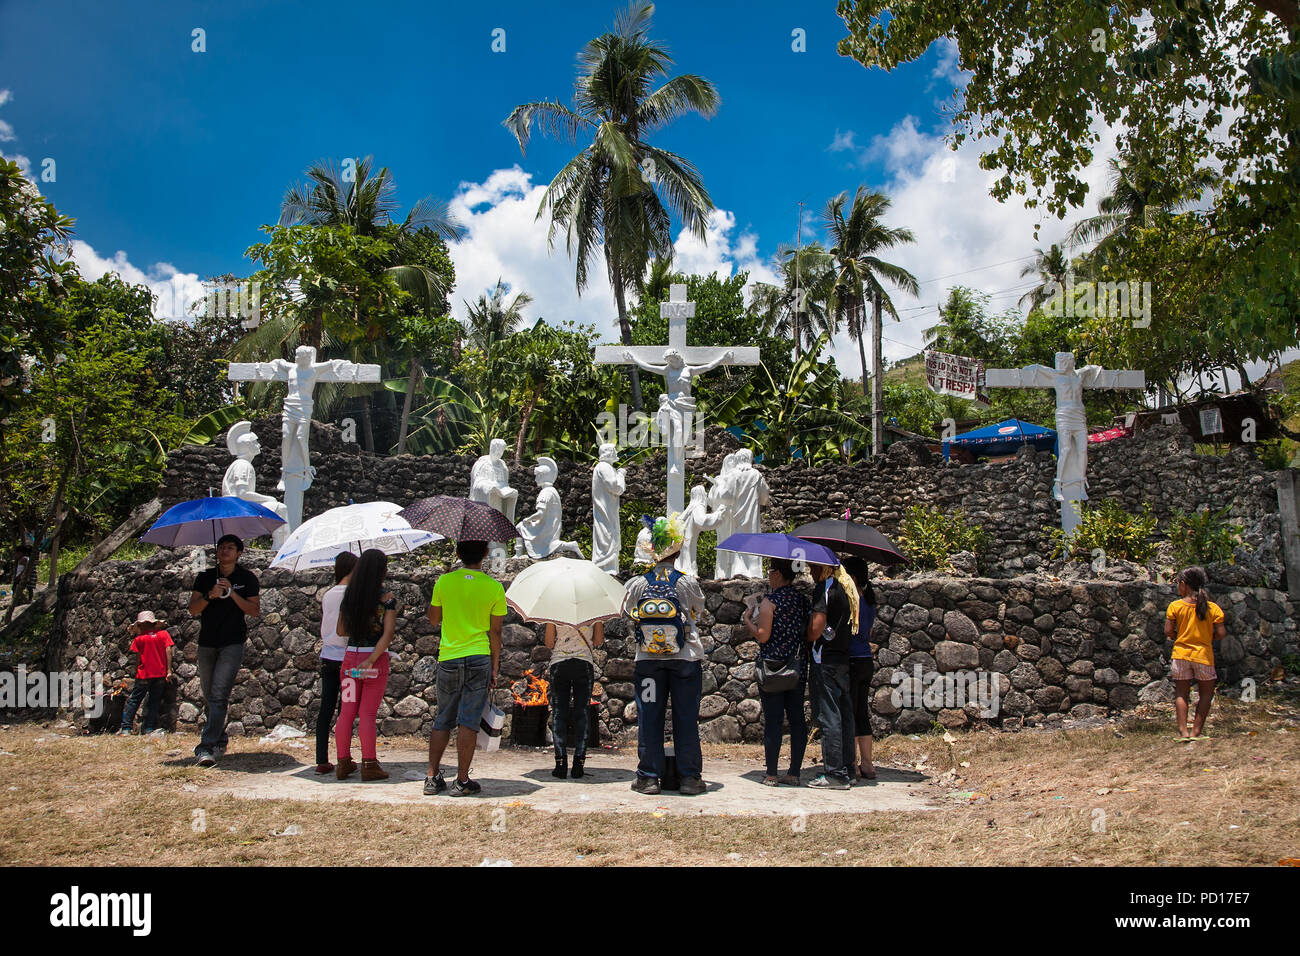 CEBU CITY, PHILIPPINES-MARCH 25, 2016: Celestial Garden in Banawa Hills in Cebu city on March 25, 2016. Philippines. It is most visited by Cebuanos an Stock Photo